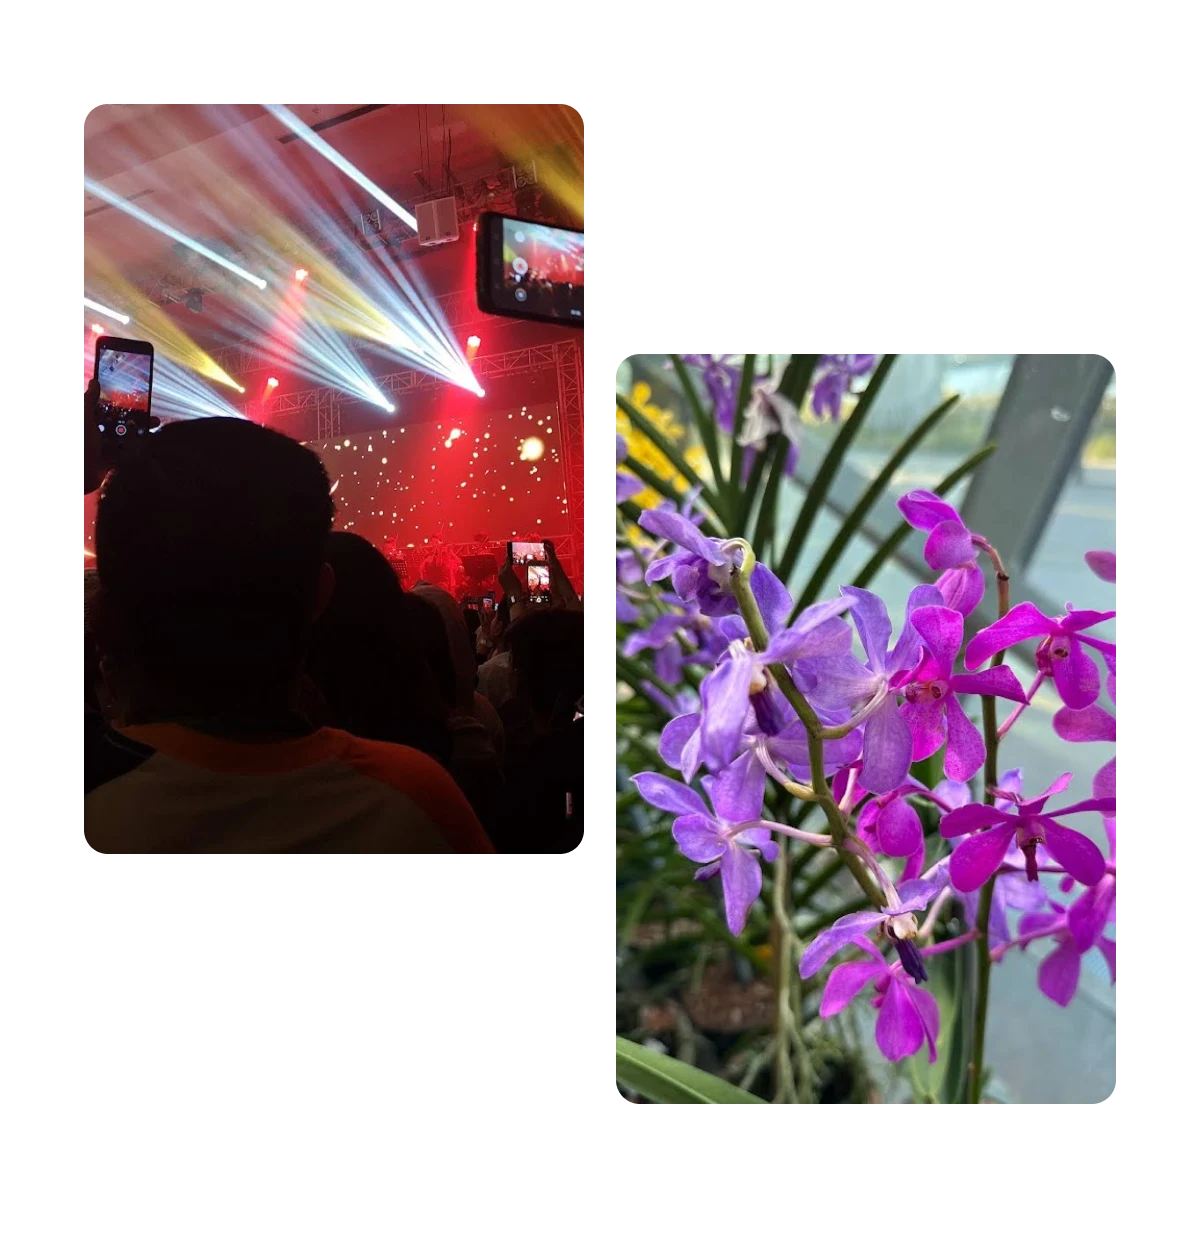 Two pins, taking photos of light show, colorful flowers